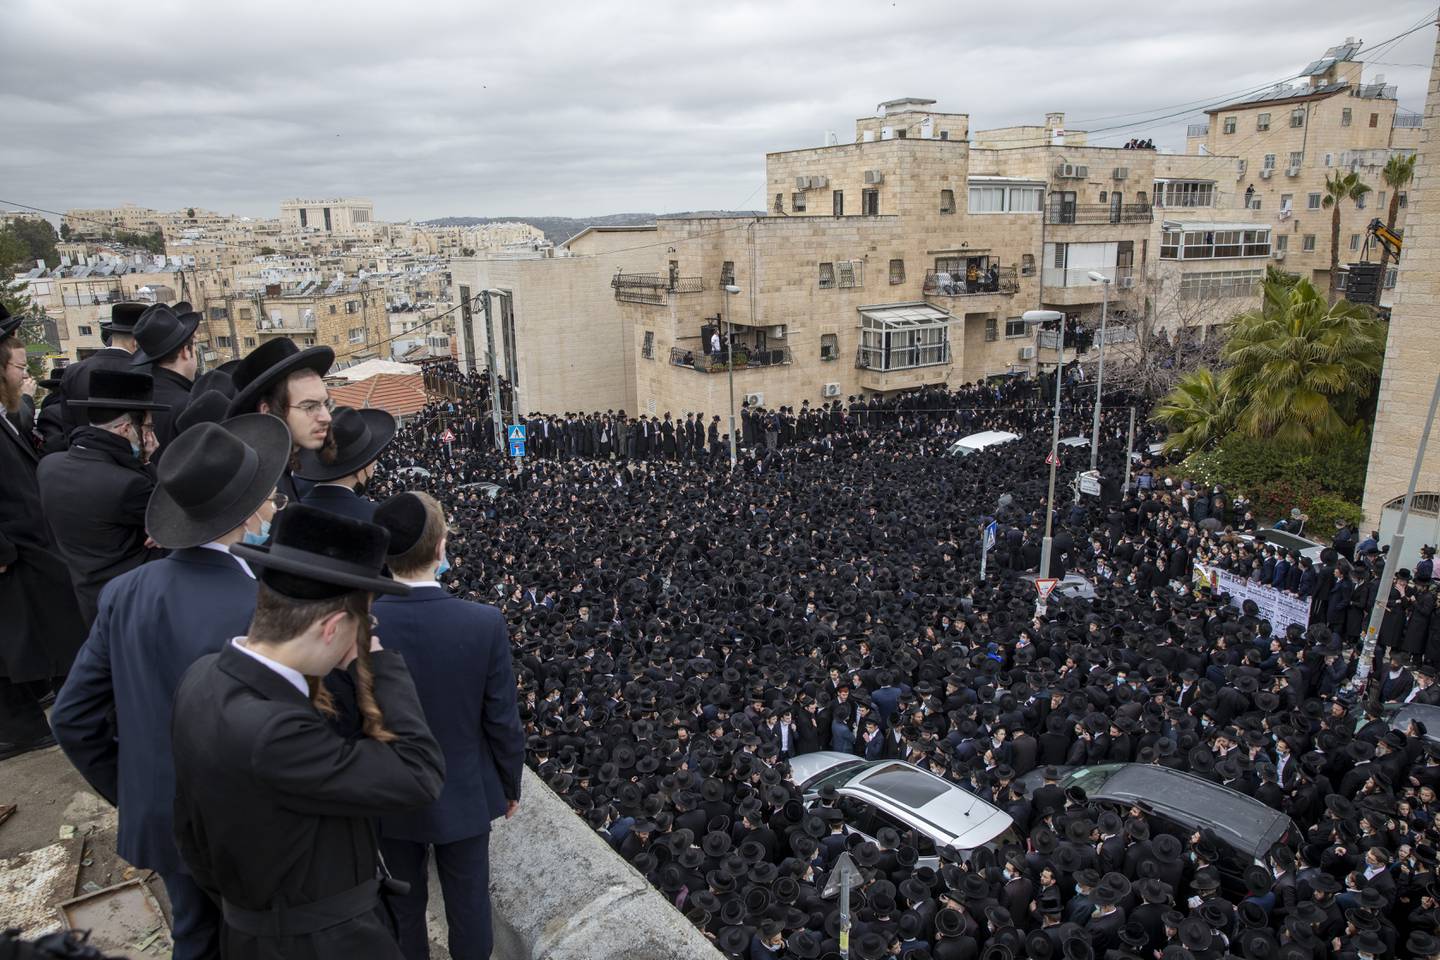 In this Sunday, Jan. 31, 2021, file photo, Thousands of ultra-Orthodox Jews participate in funeral for prominent rabbi Meshulam Soloveitchik, during a nationwide lockdown to curb the spread of the virus. in Jerusalem. Along with the impressive speed of its vaccination campaign, Israel is discovering its limits. Even after inoculating over one-third of its population, the country remains stuck in a tight lockdown as it grapples with imported variants of the virus. (AP Photo/Ariel Schalit, FILE)